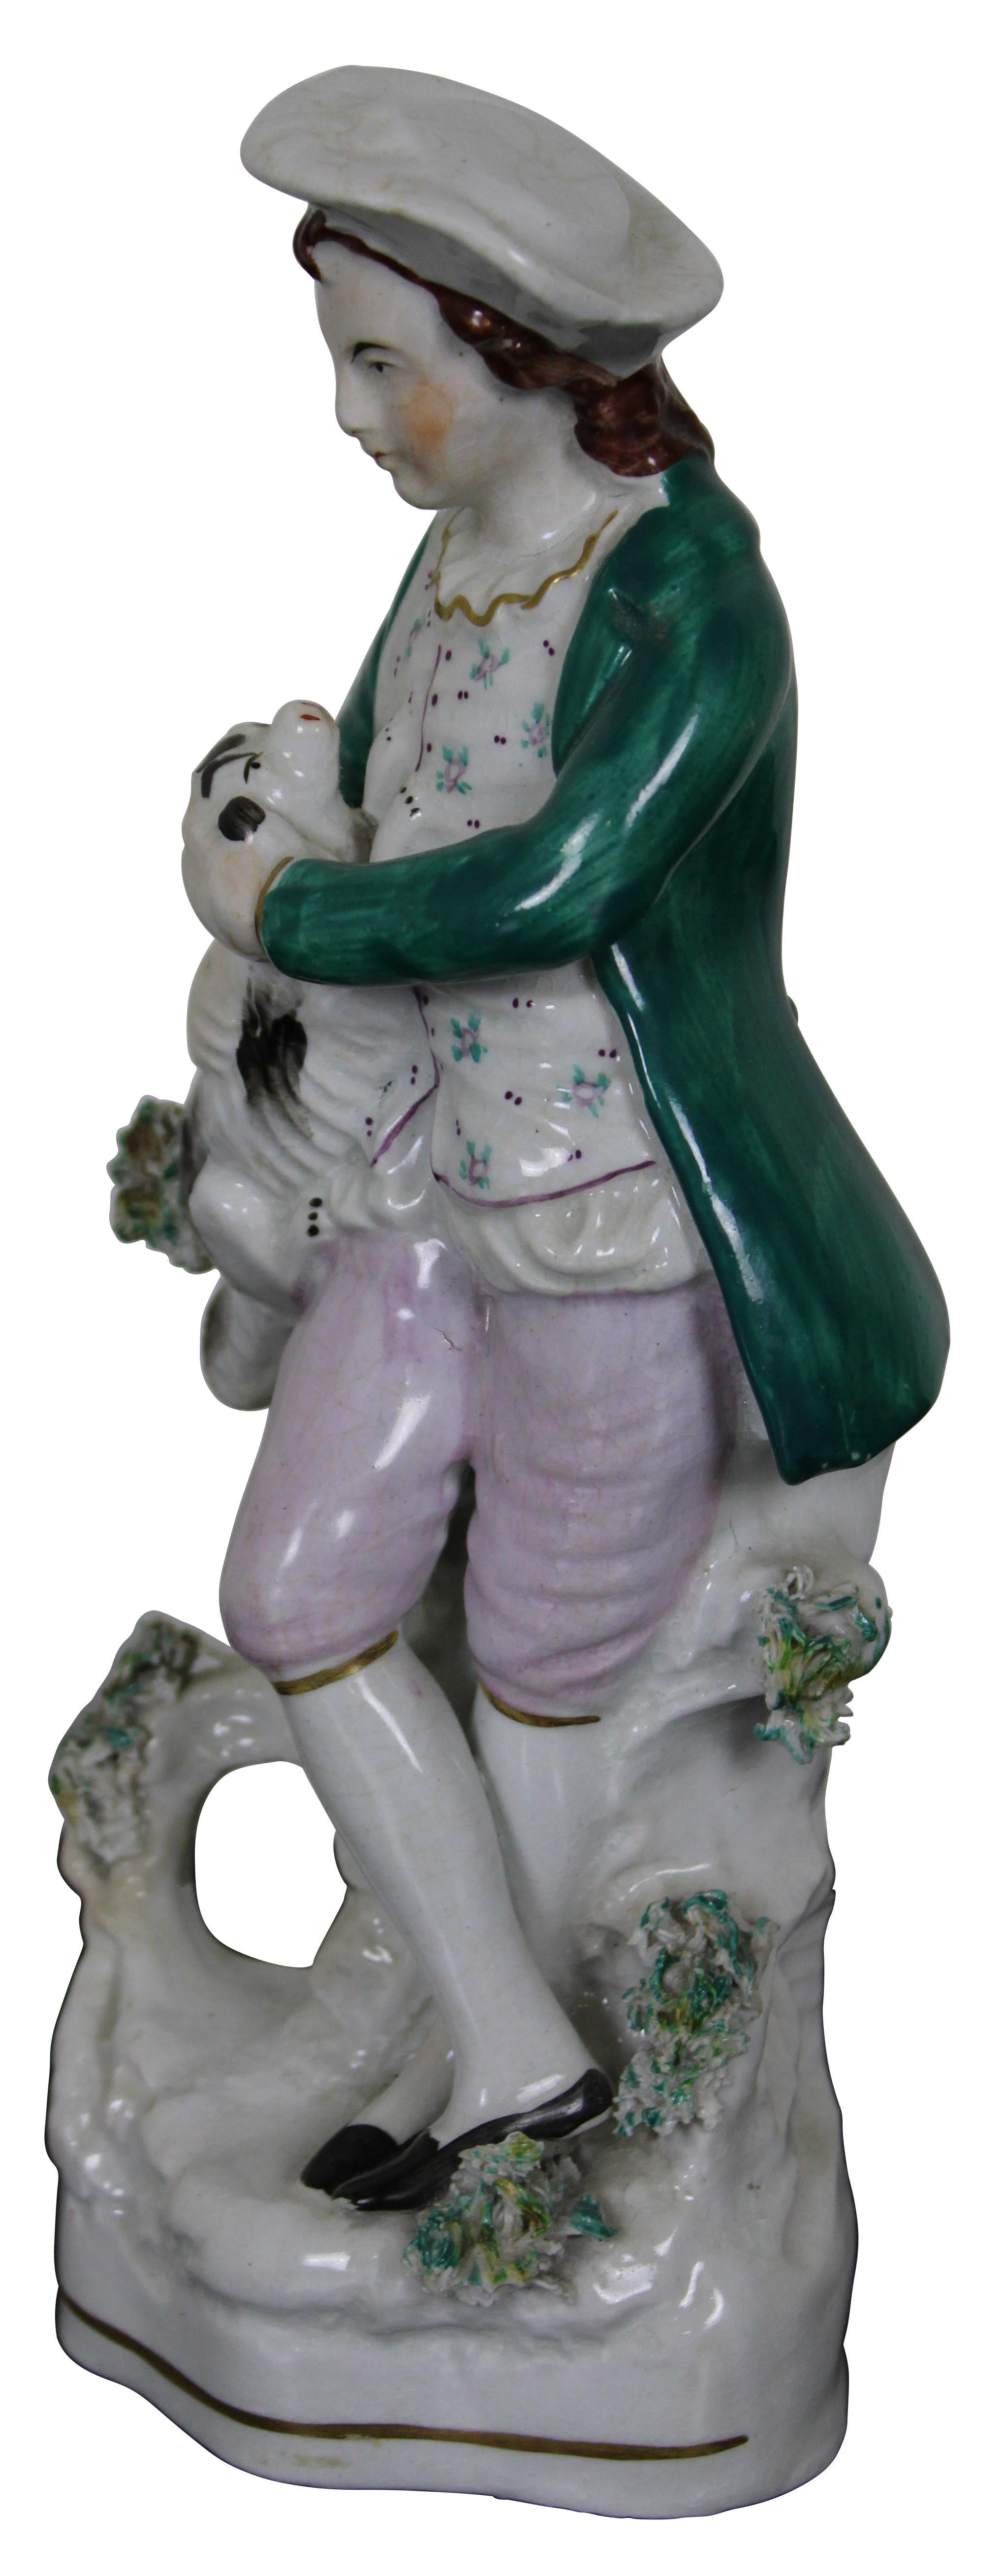 Antique Victorian Staffordshire porcelain figurine in the shape of a man holding a small spotted Spaniel dog. Measure: 8